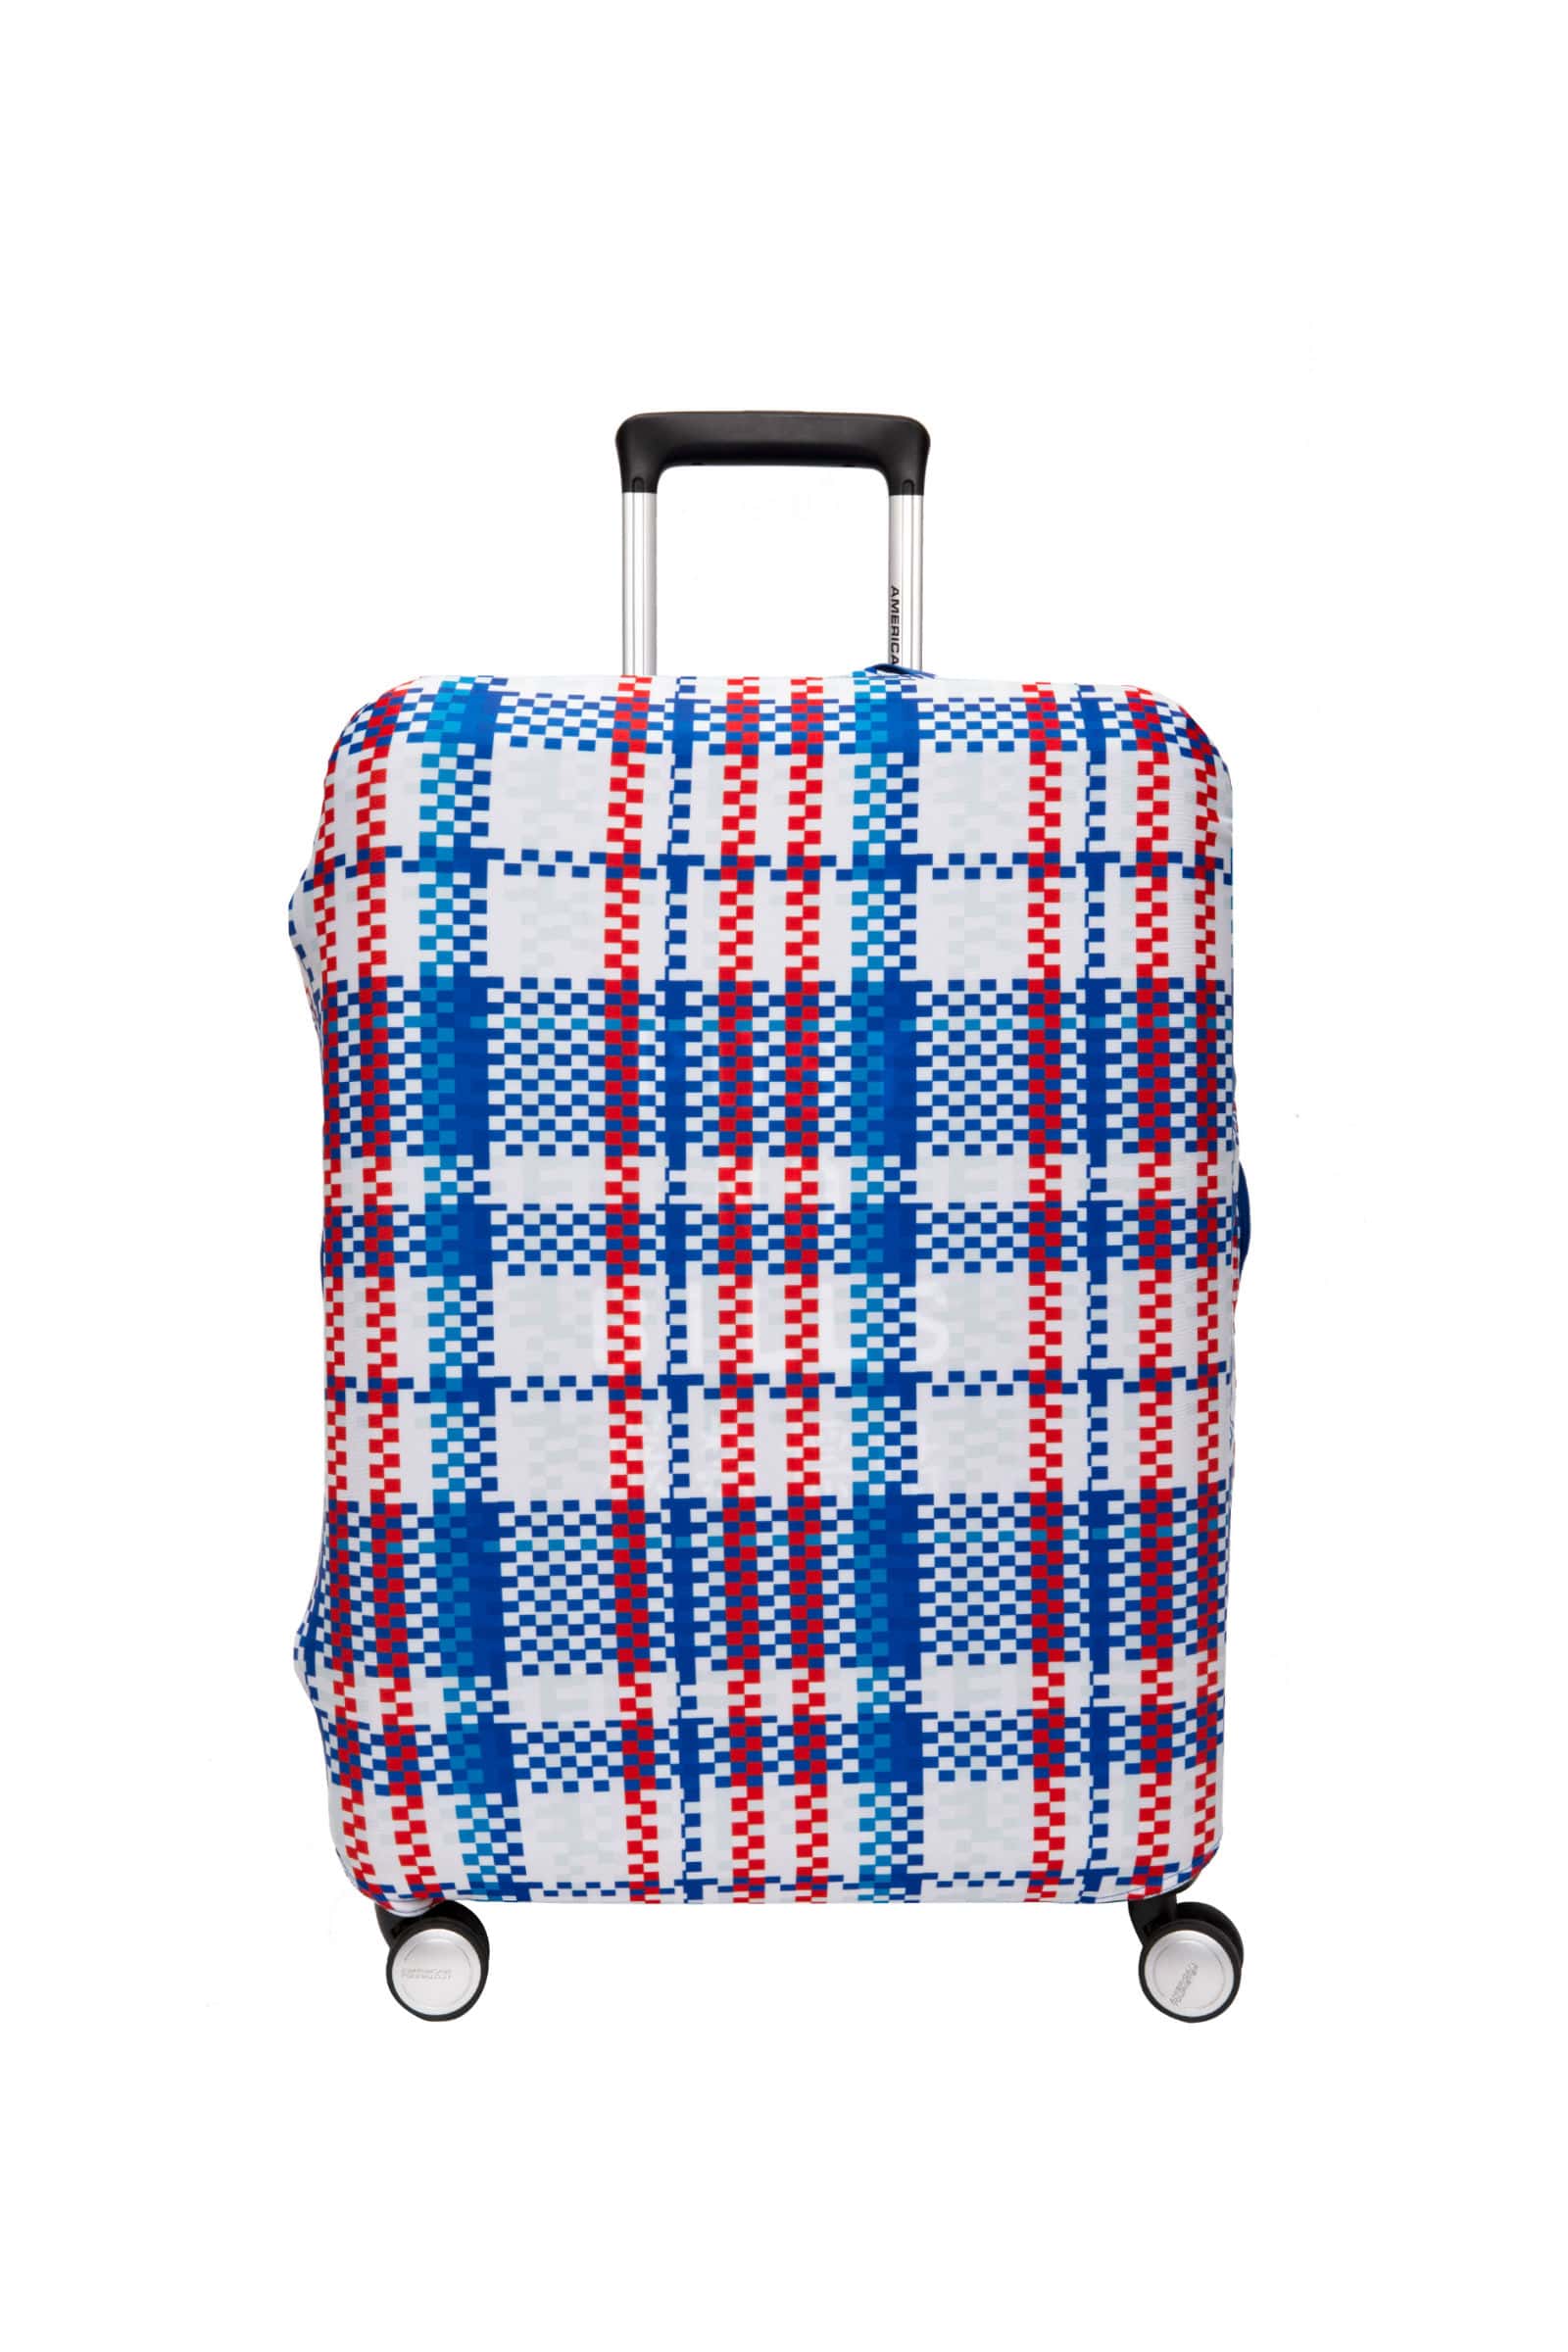 I COME FROM HK STRETCHABLE LUG.COVER M  size | American Tourister